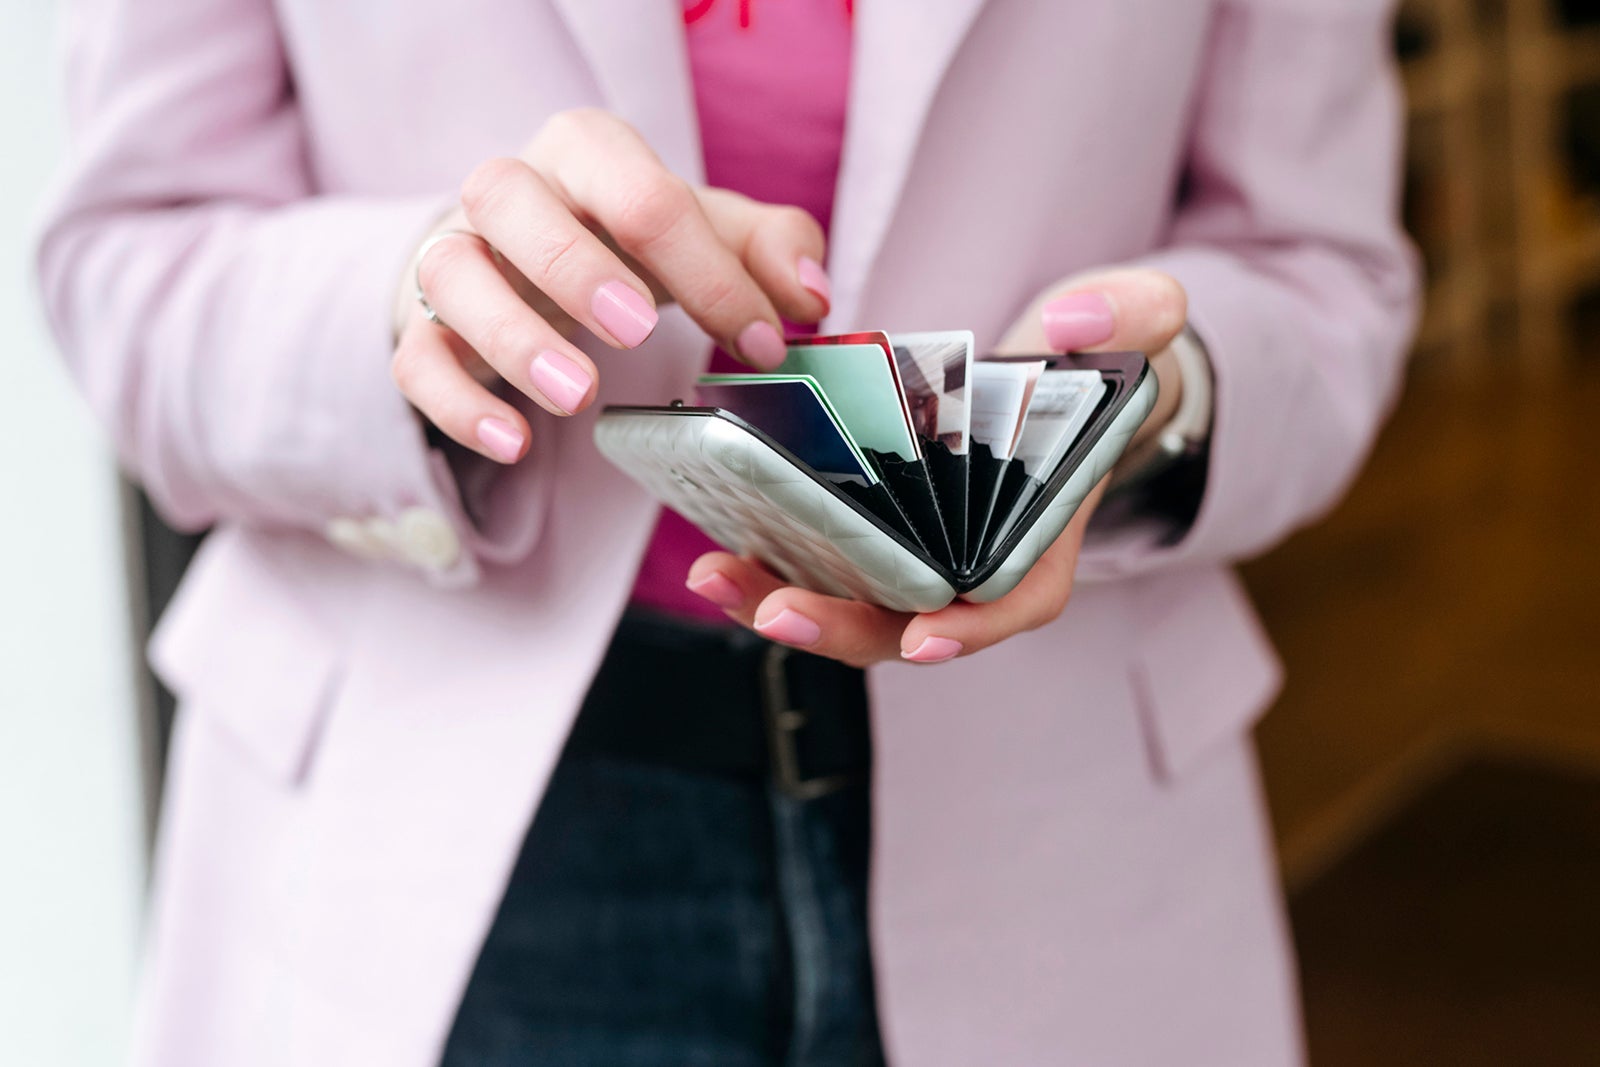 Woman's hands with cardholder